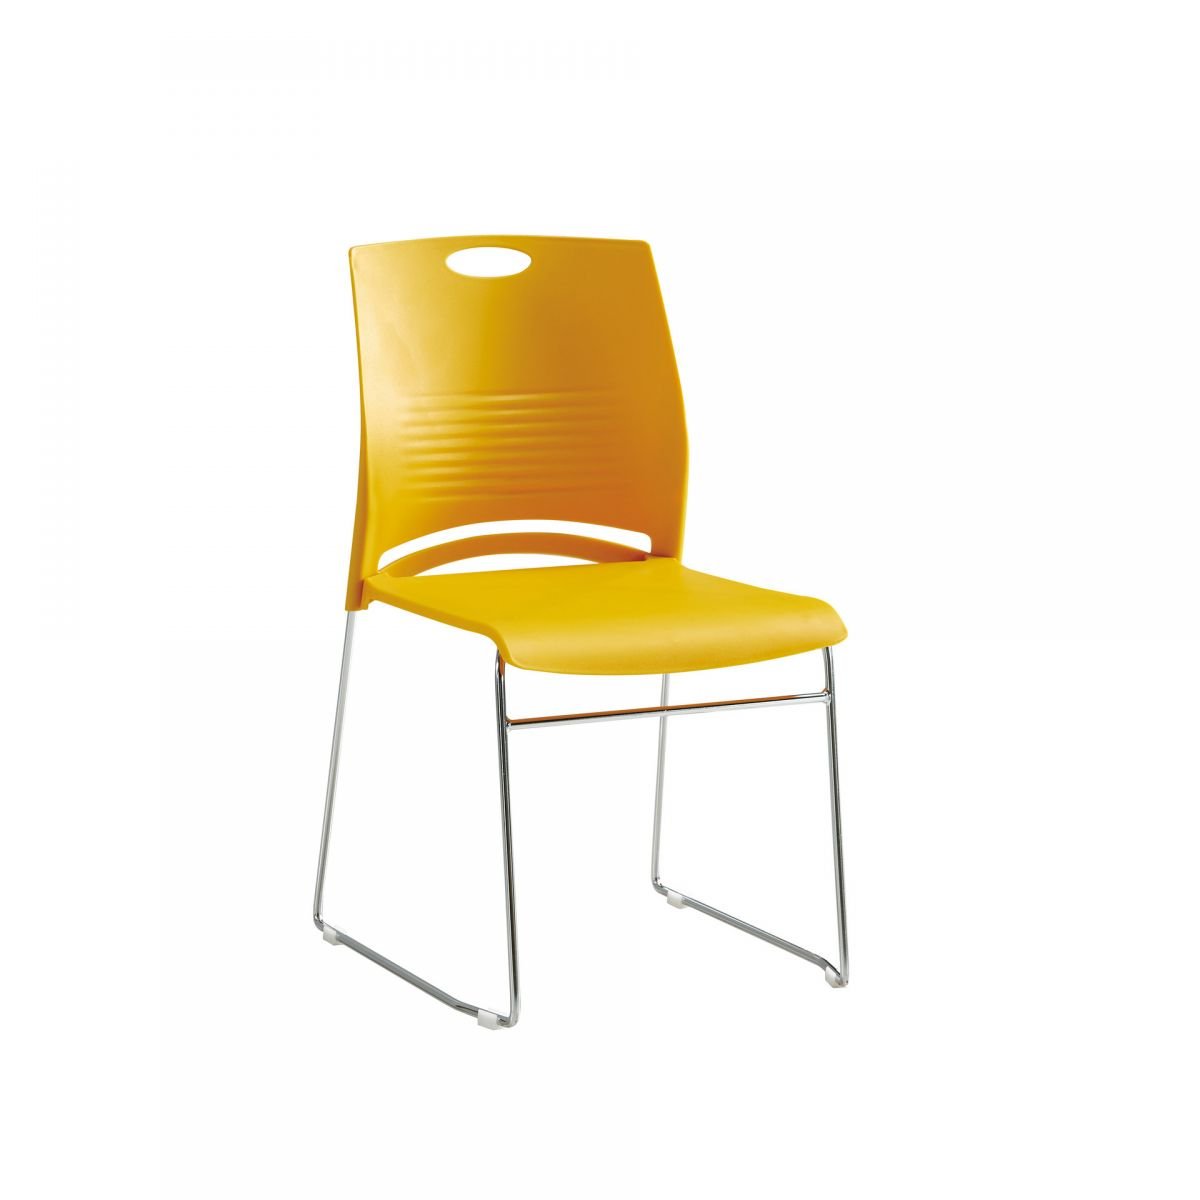 Art Deco Ergonomic Plastic Task Chair in Yellow with Backrest and Steel Base, Yellow